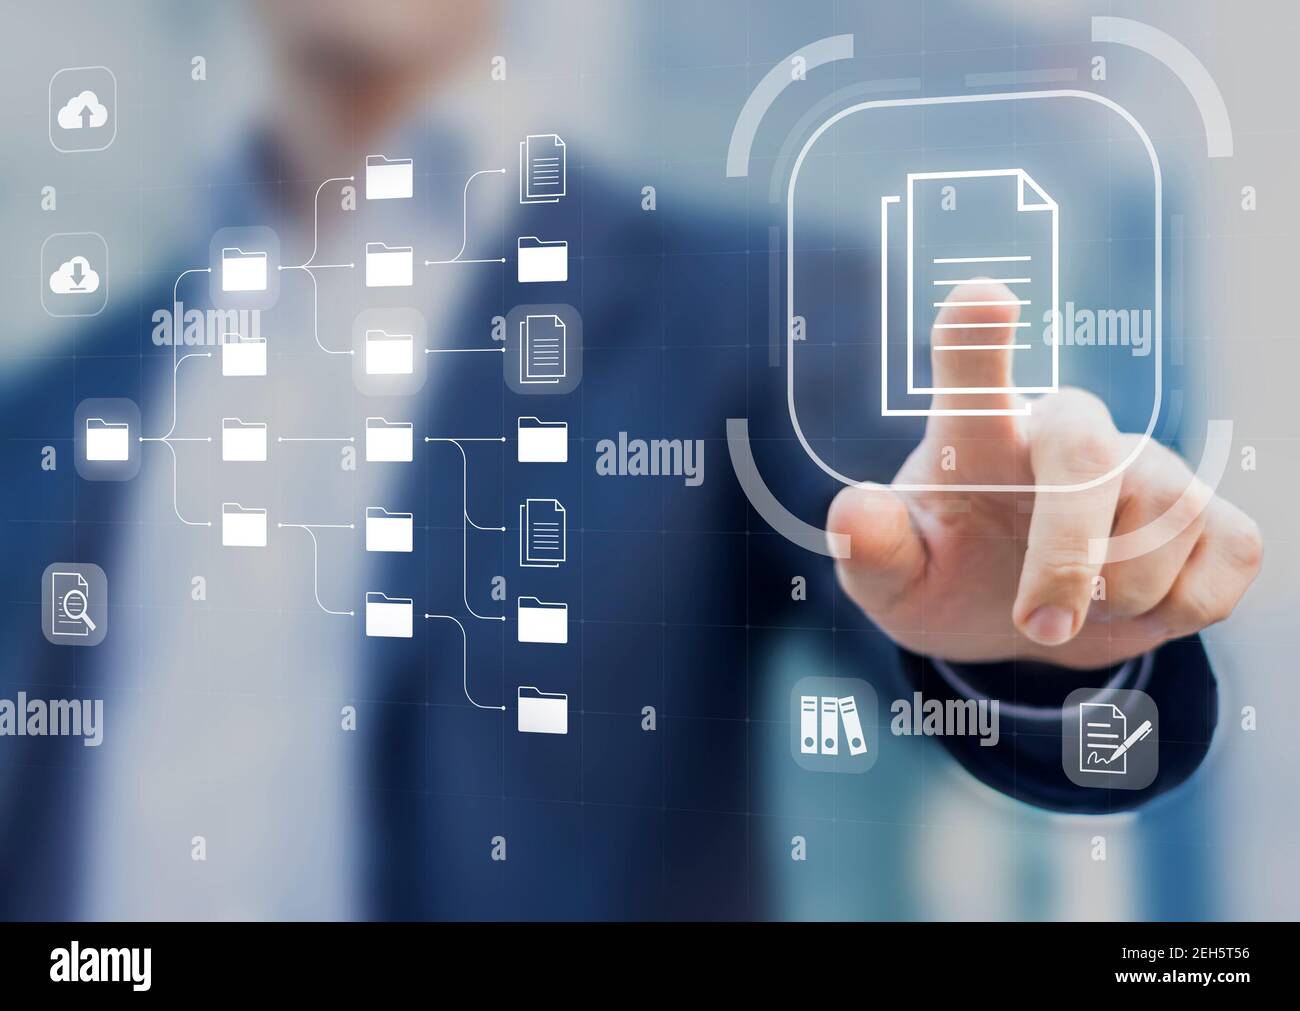 Document Management System (DMS) in addition to digitization and process automation to efficiently manage files, knowledge and documentation in enterp Stock Photo